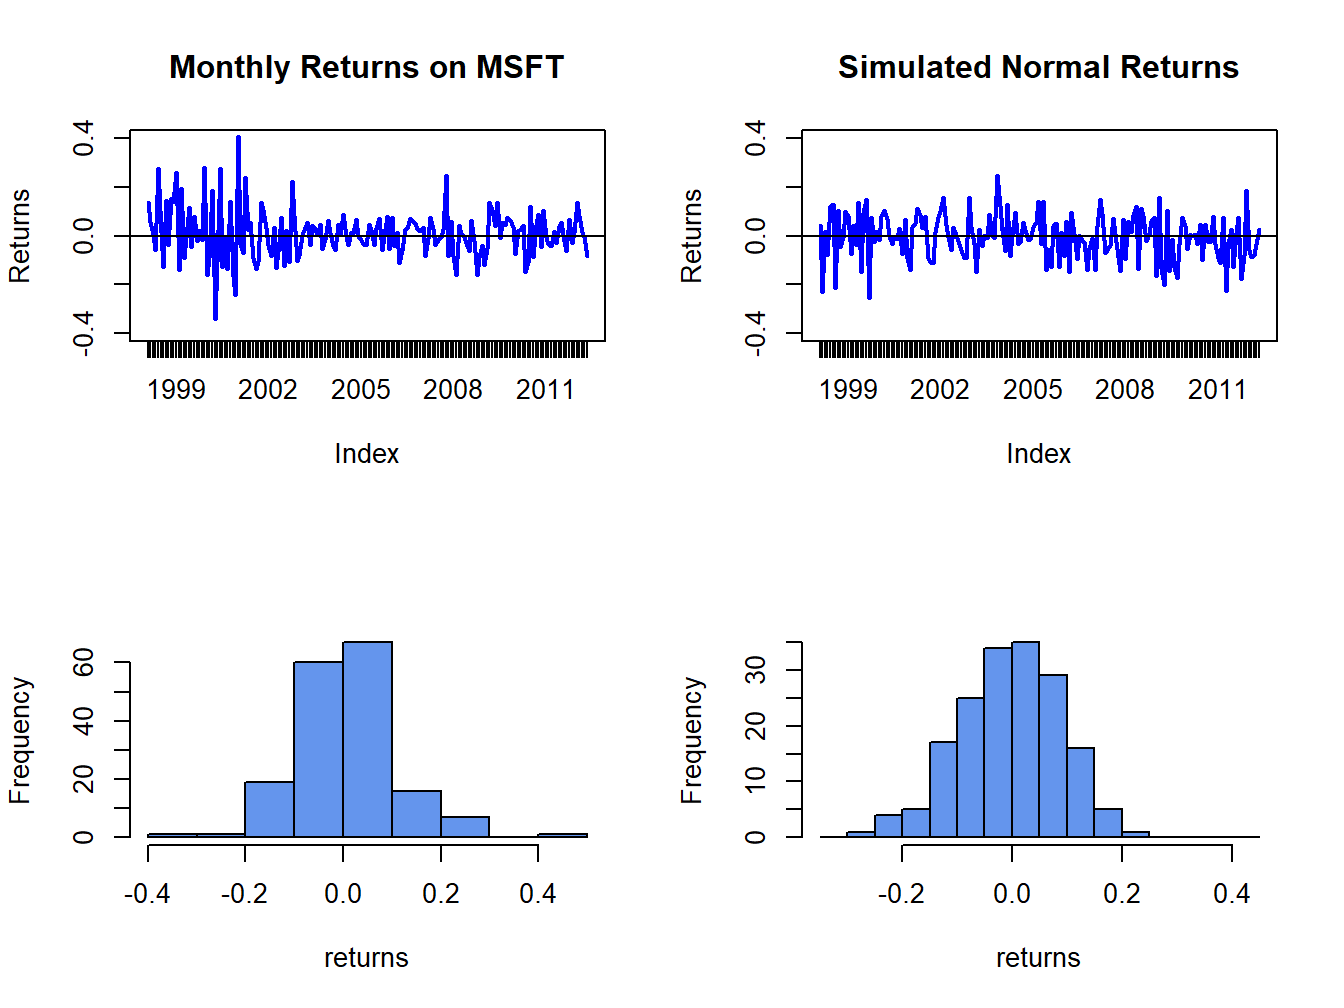 Comparison of Microsoft monthly returns with simulated normal returns with the same mean and standard deviation as the Microsoft returns.